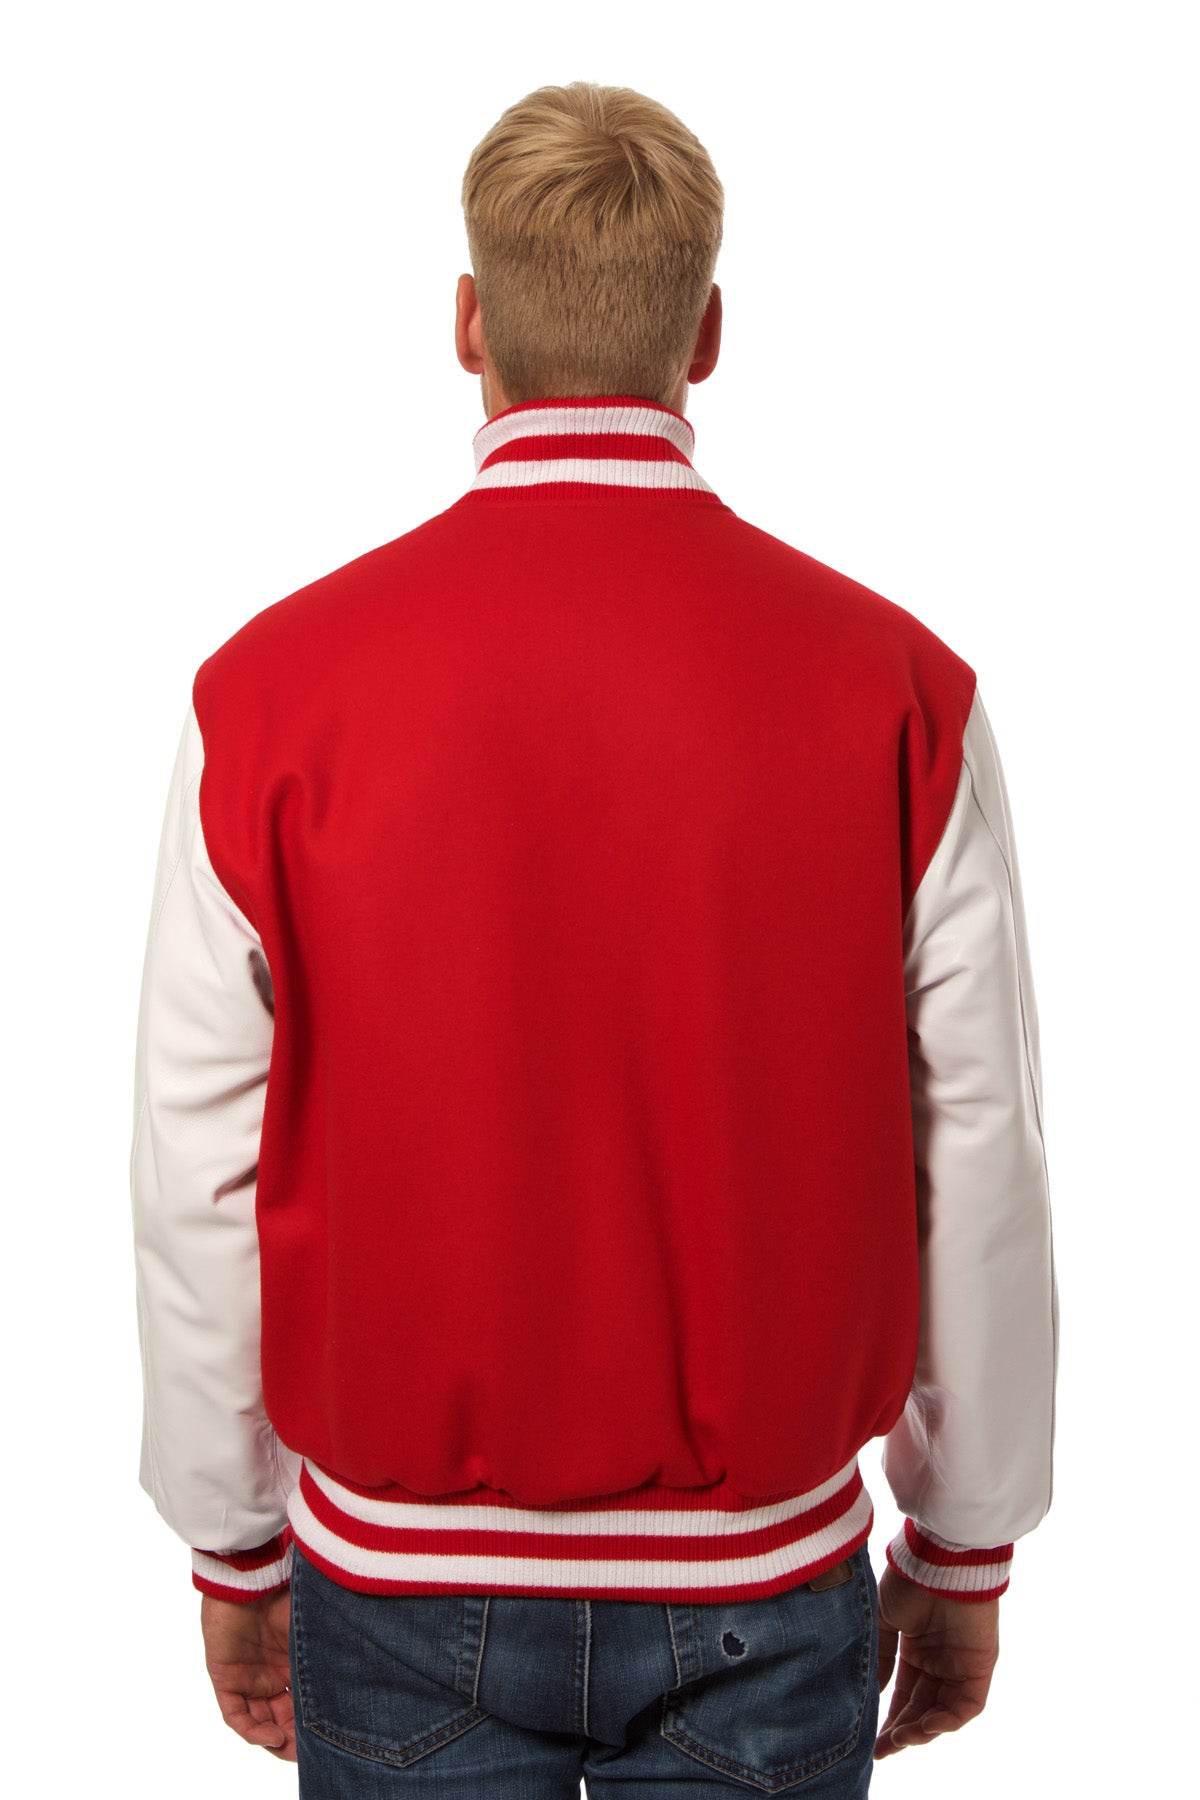 Wool and Leather Varsity Jacket in Red and White